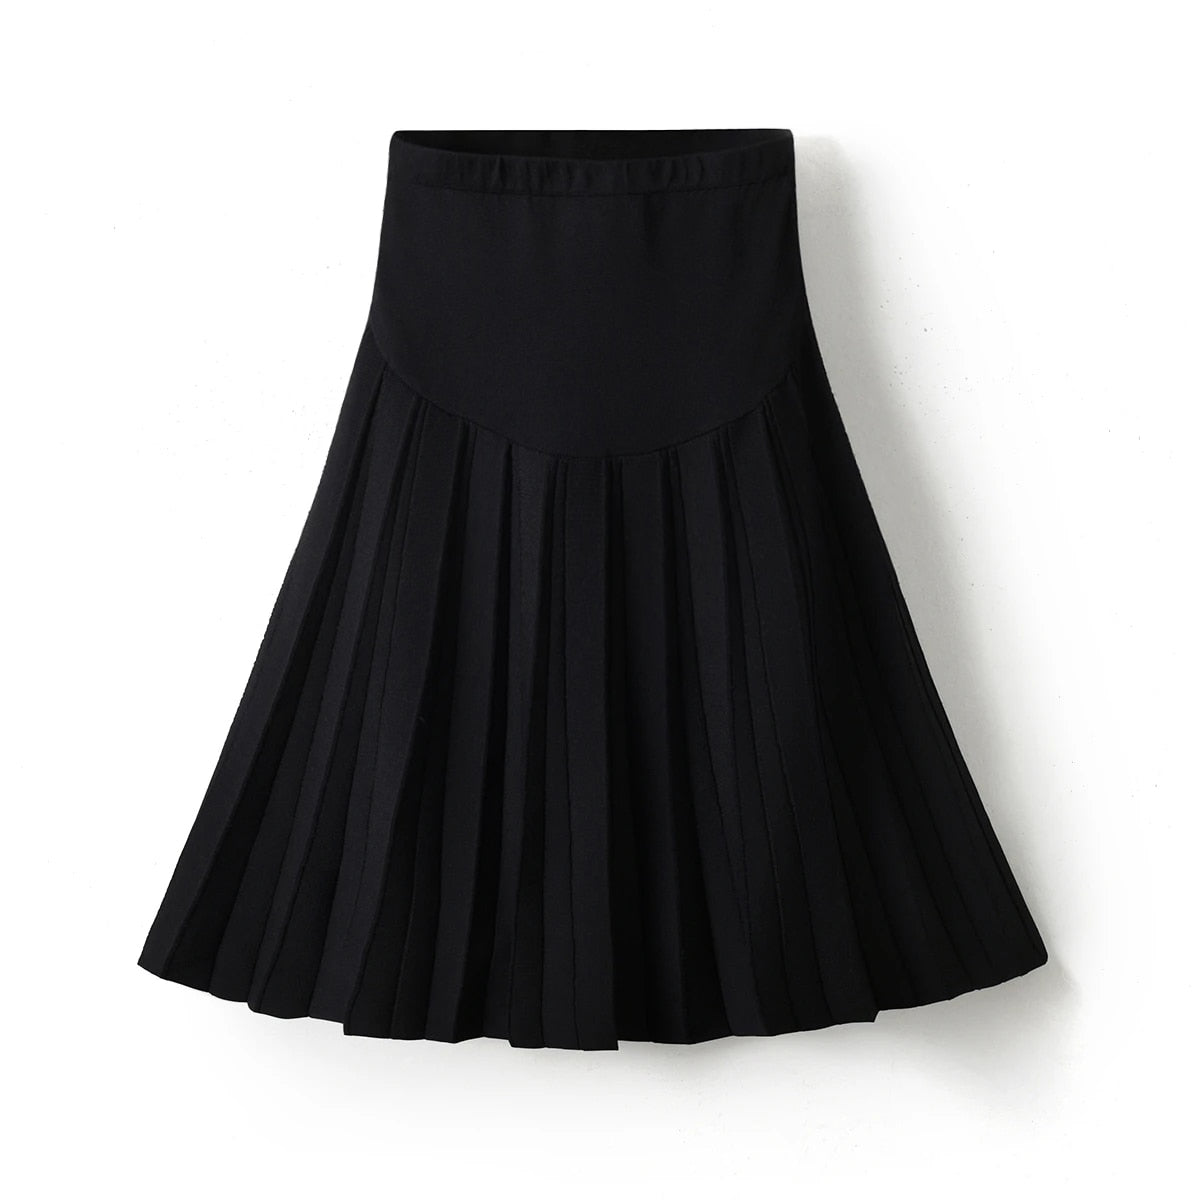 Maternity Knit Skirts  Pregnant's Knitted Skirts Women Classic Black Dress Elastic Waist Great Quality